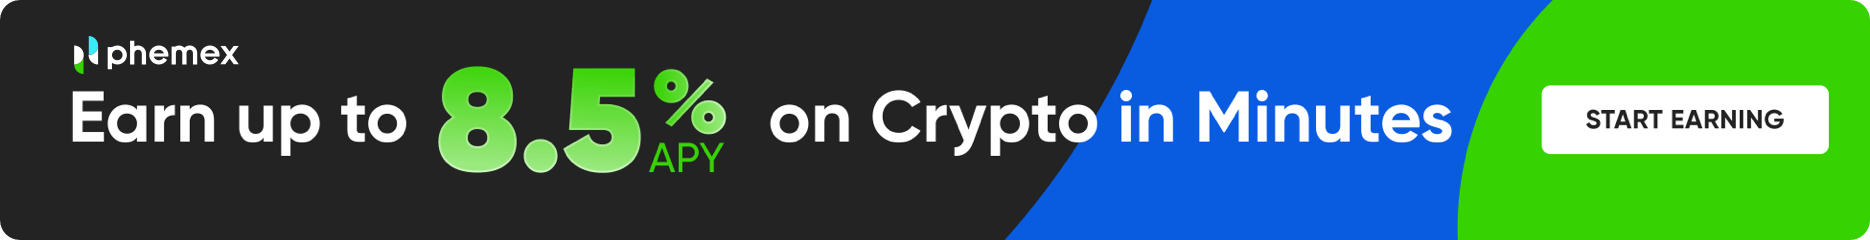 Earn 8.5% apy on Crypto Interest account